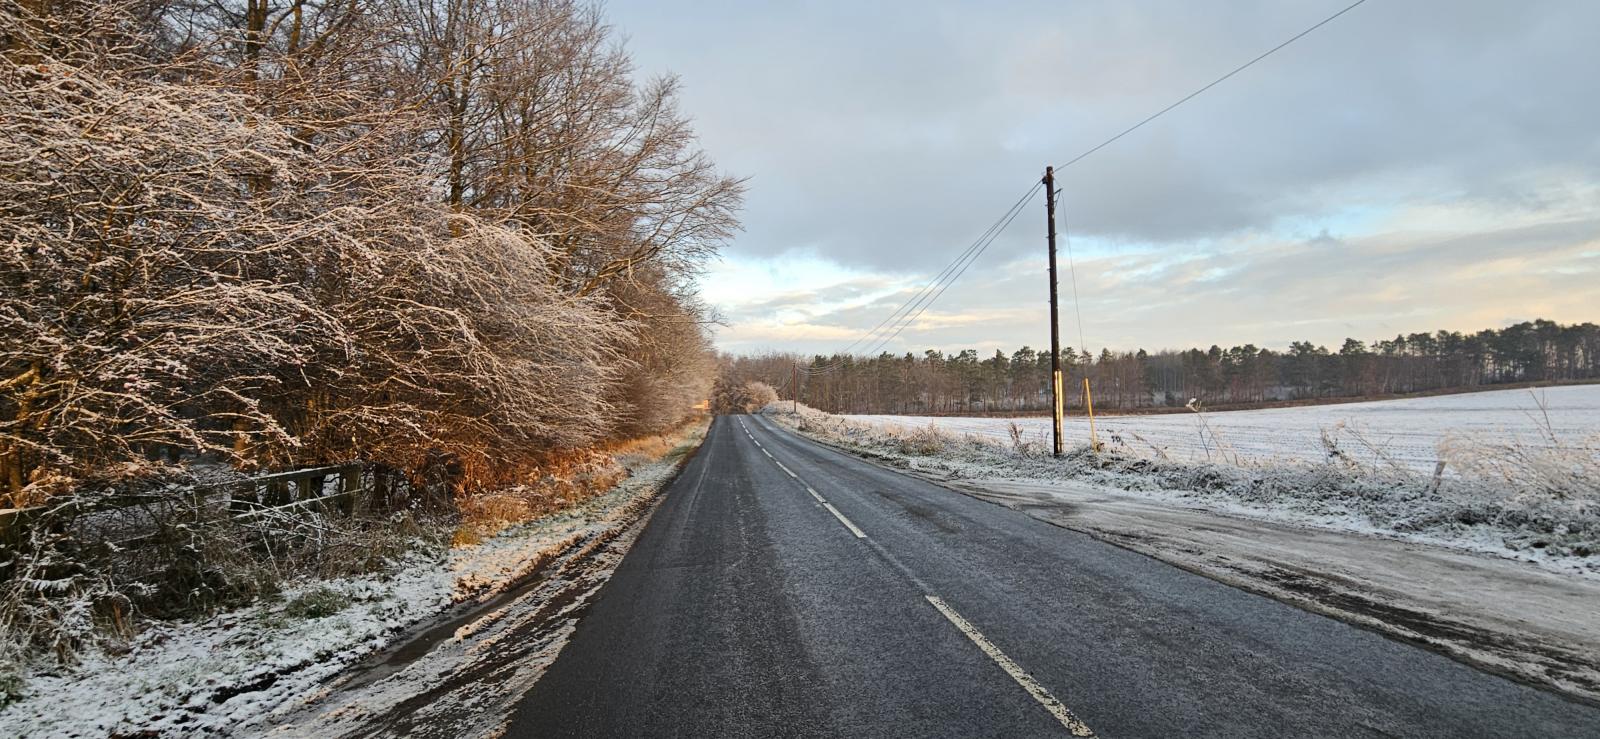 UK winter weather warnings: Snow, Ice and Cold Health Alerts